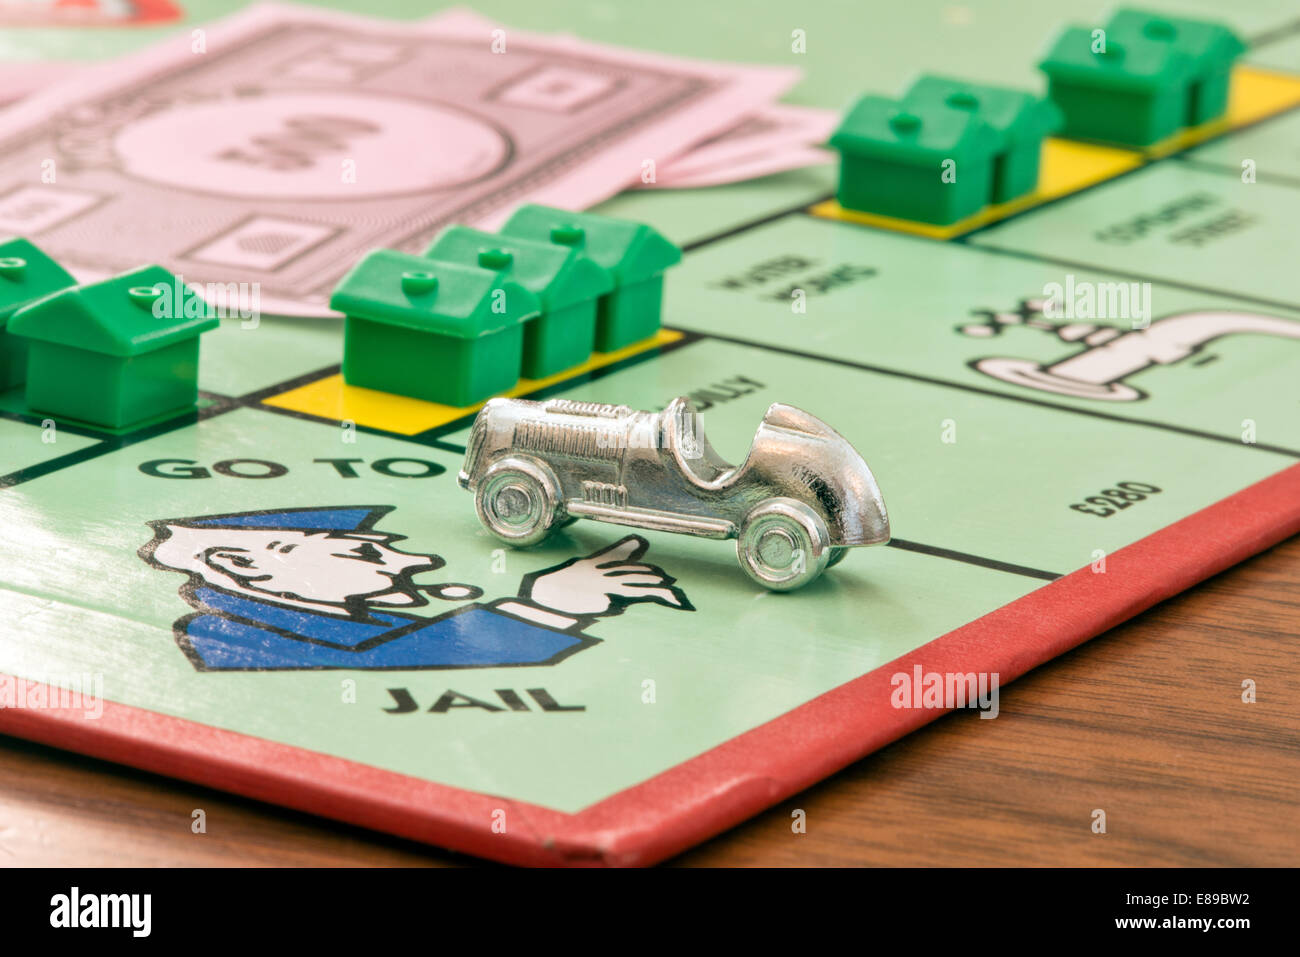 Monopoly Board Stockfotos und -bilder Kaufen - Alamy Within Get Out Of Jail Free Card Template